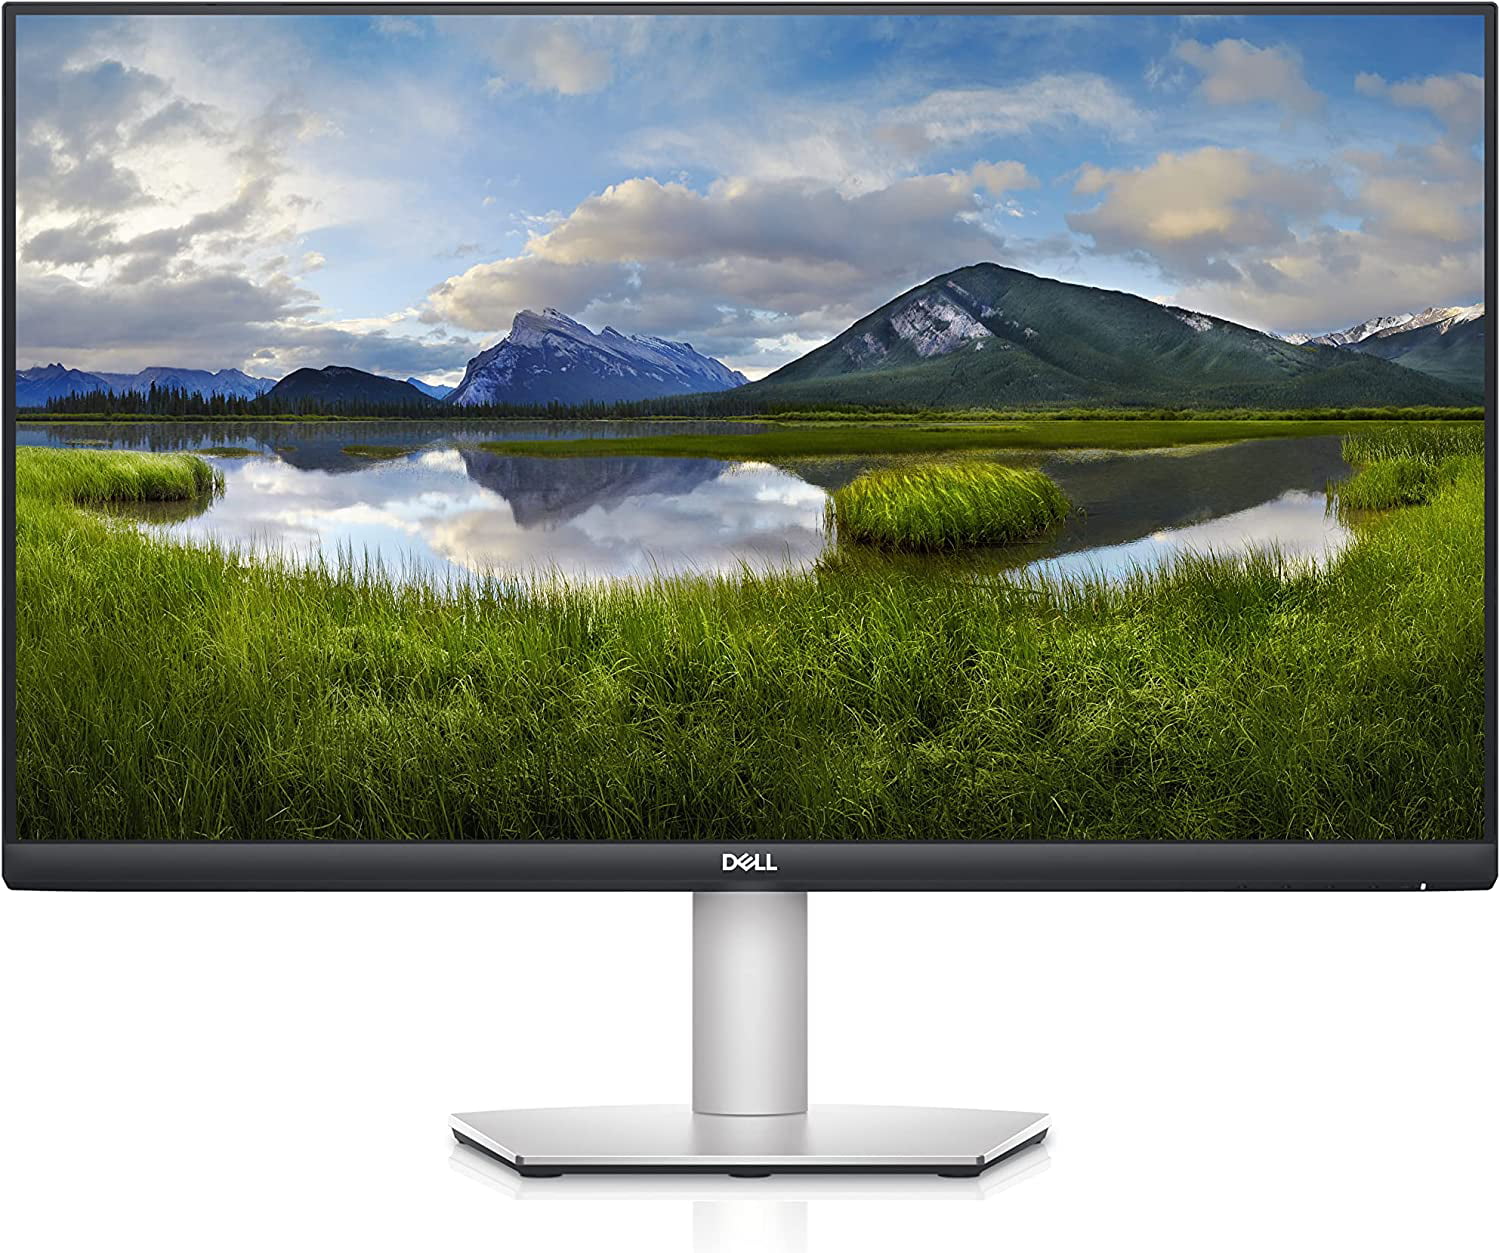 Used Dell 27